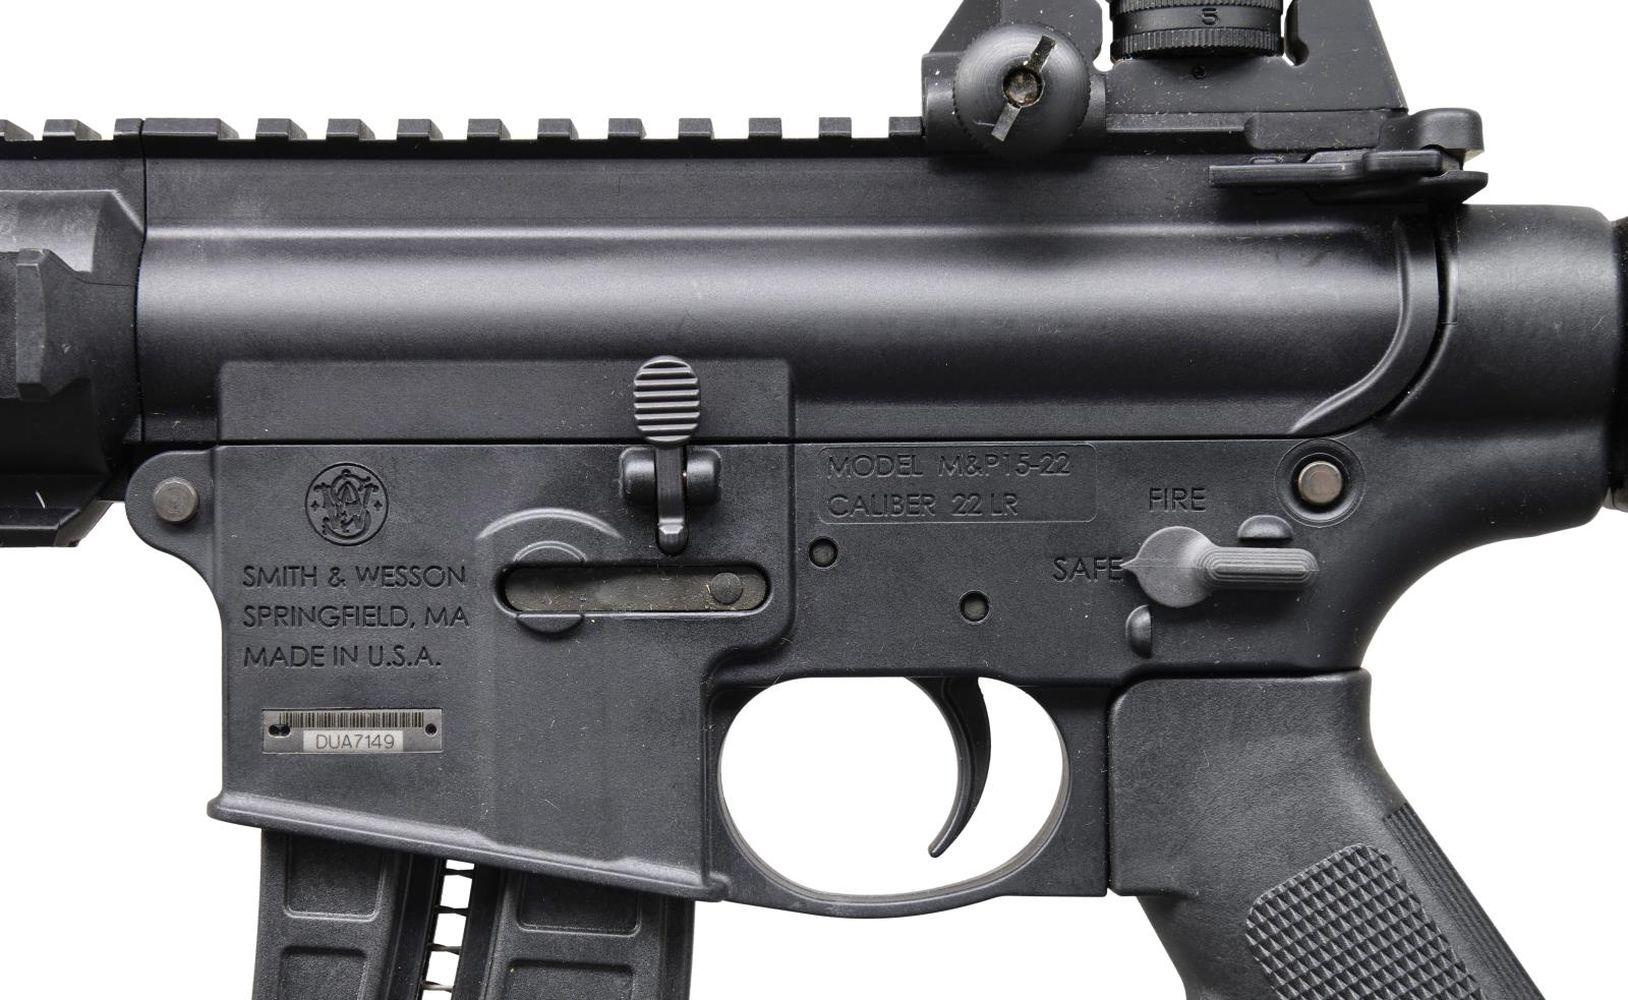 SMITH & WESSON M&P15-22 SEMI-AUTOMATIC RIFLE WITH